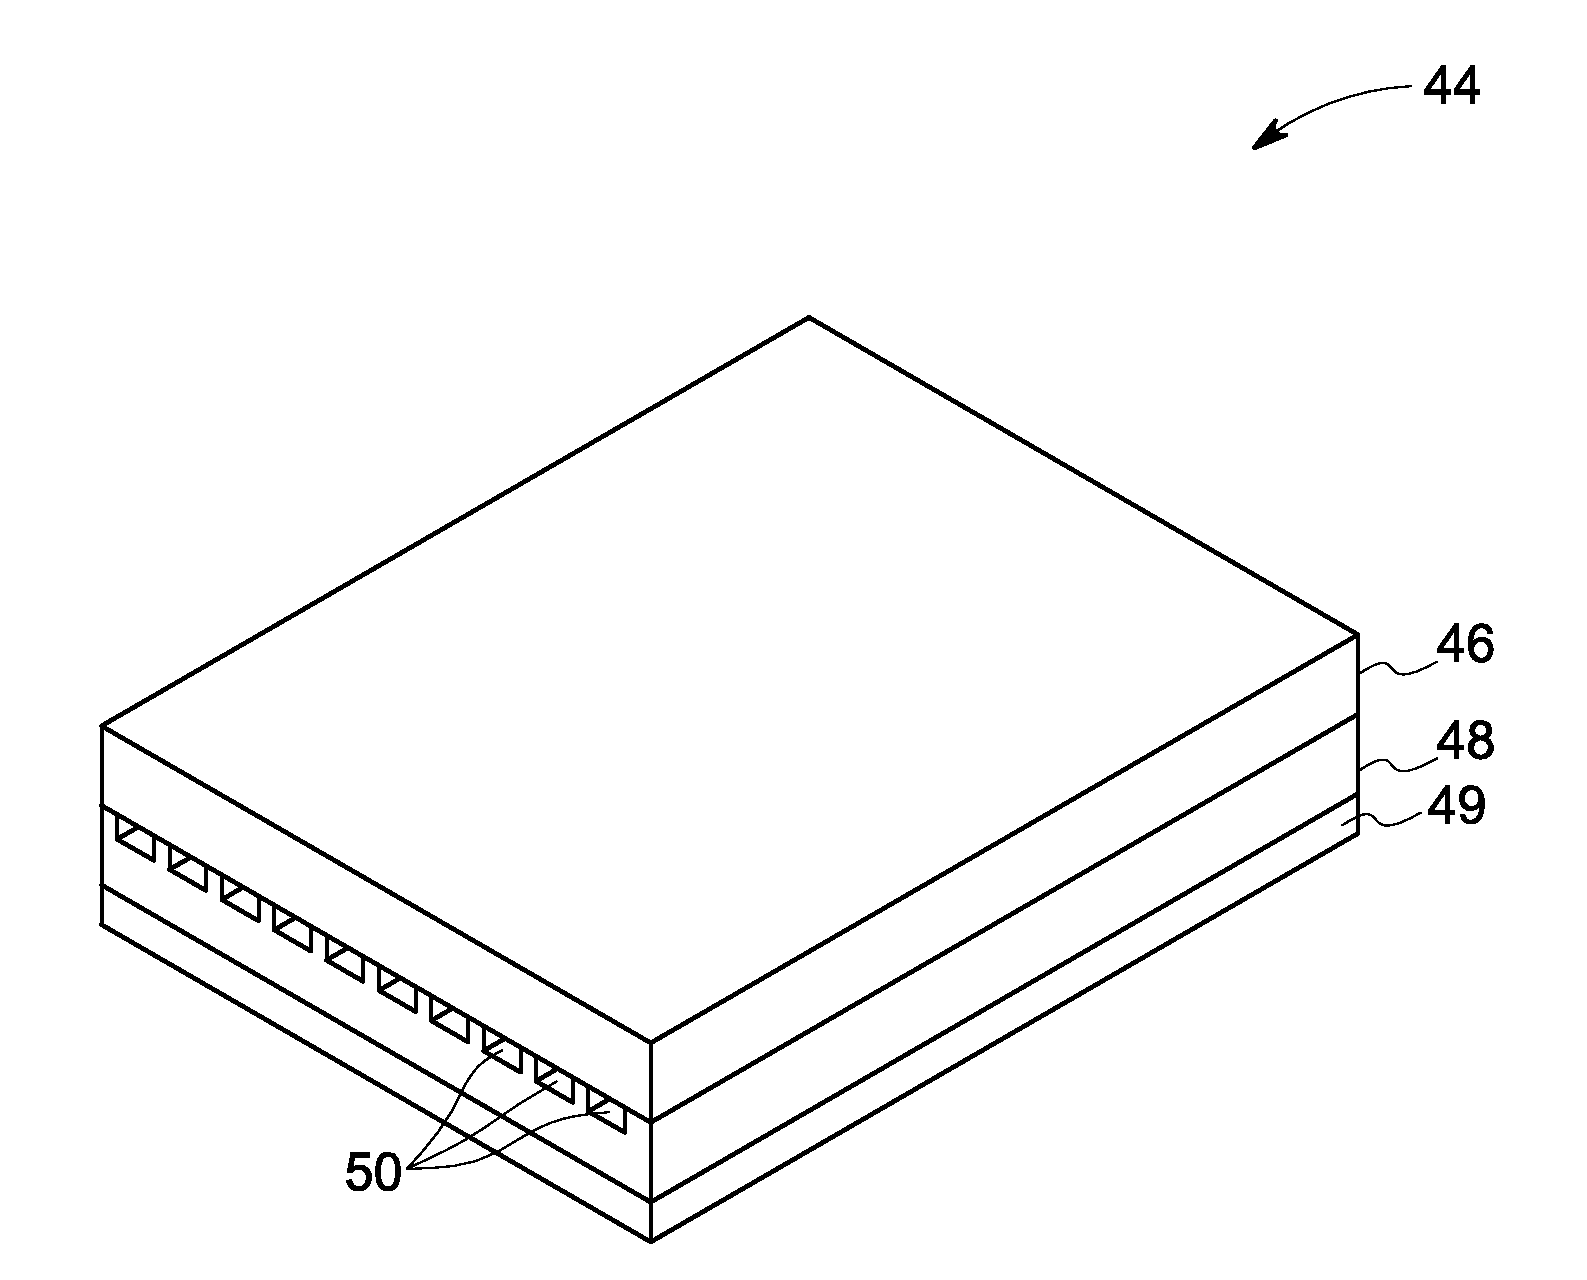 Fluidic thermal management article and method